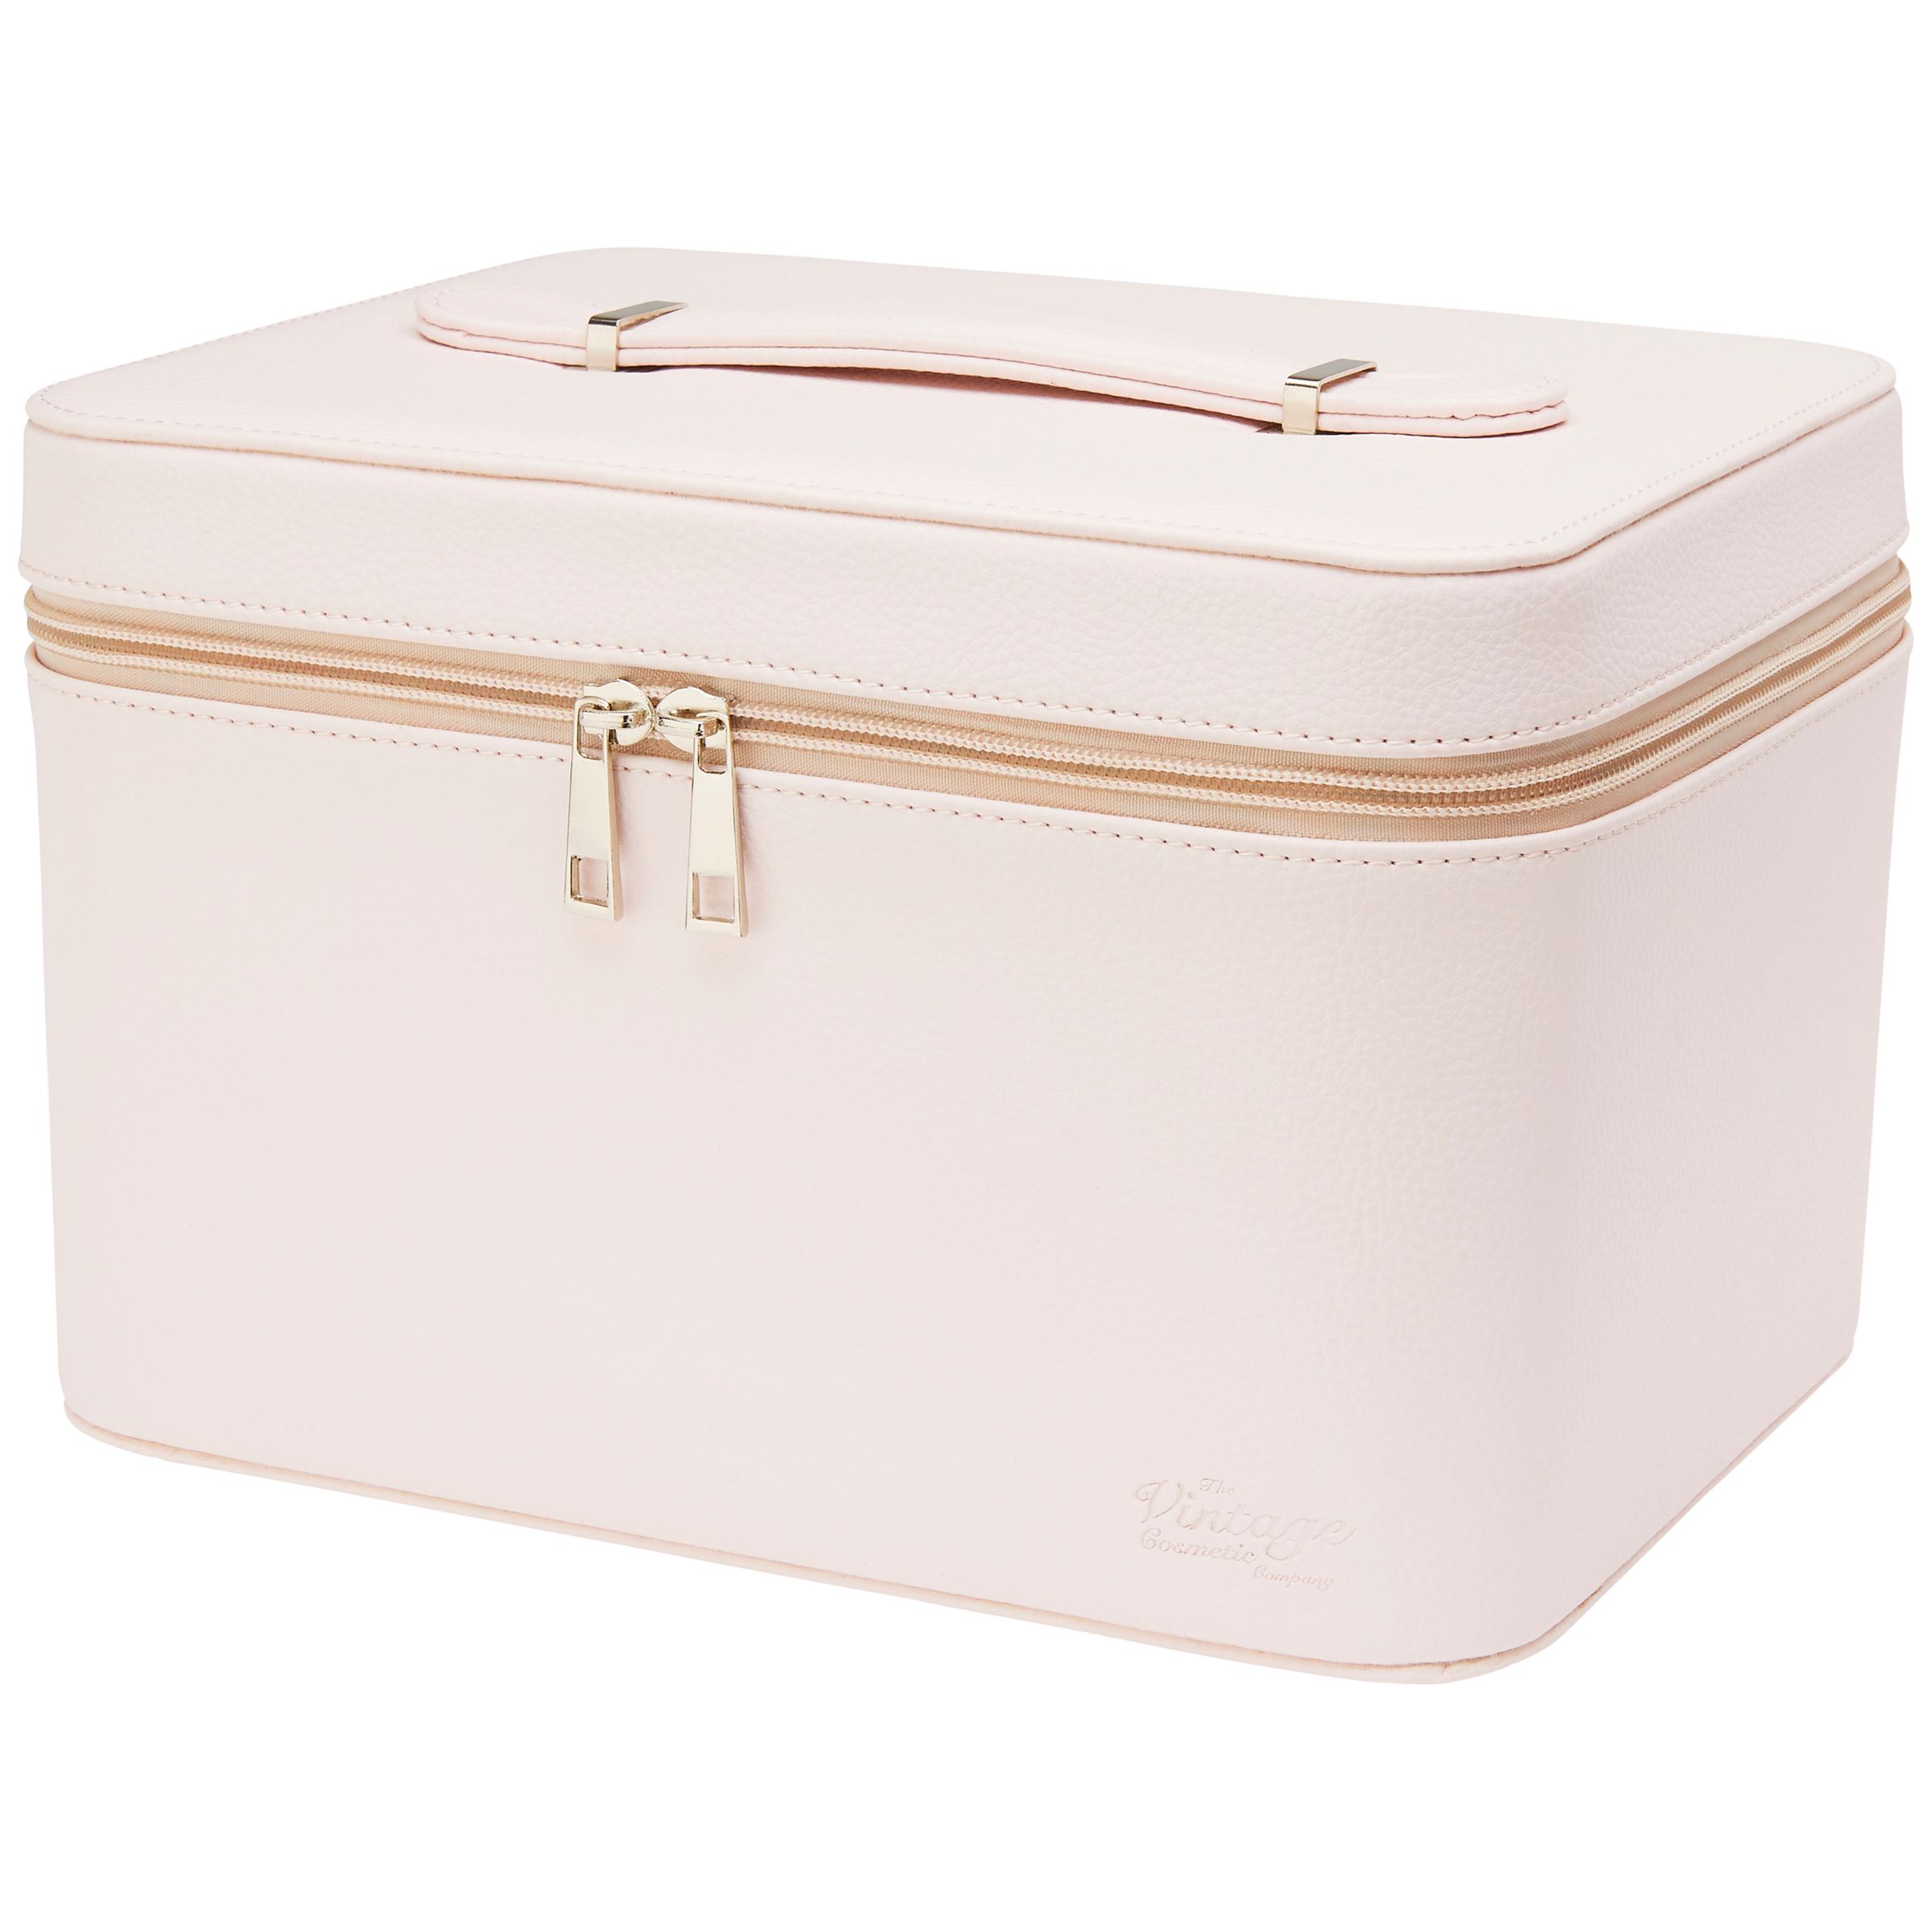 The Vintage Cosmetic Company Train Case, Dusty Pink